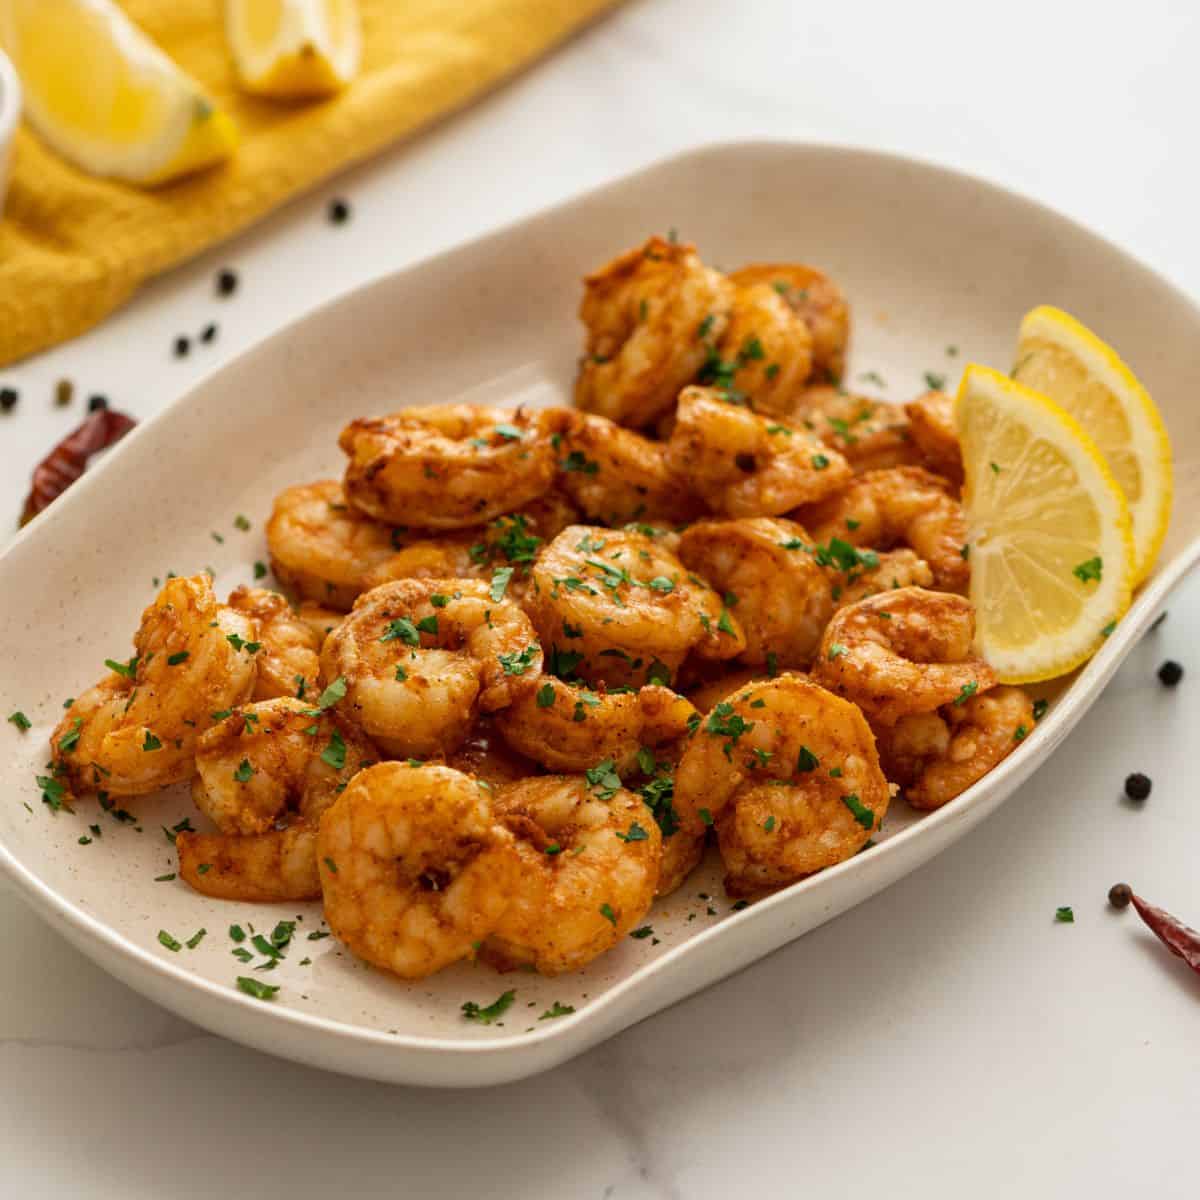 Platter of seasoned air fryer shrimp topped with parsley and served with lemon wedges.